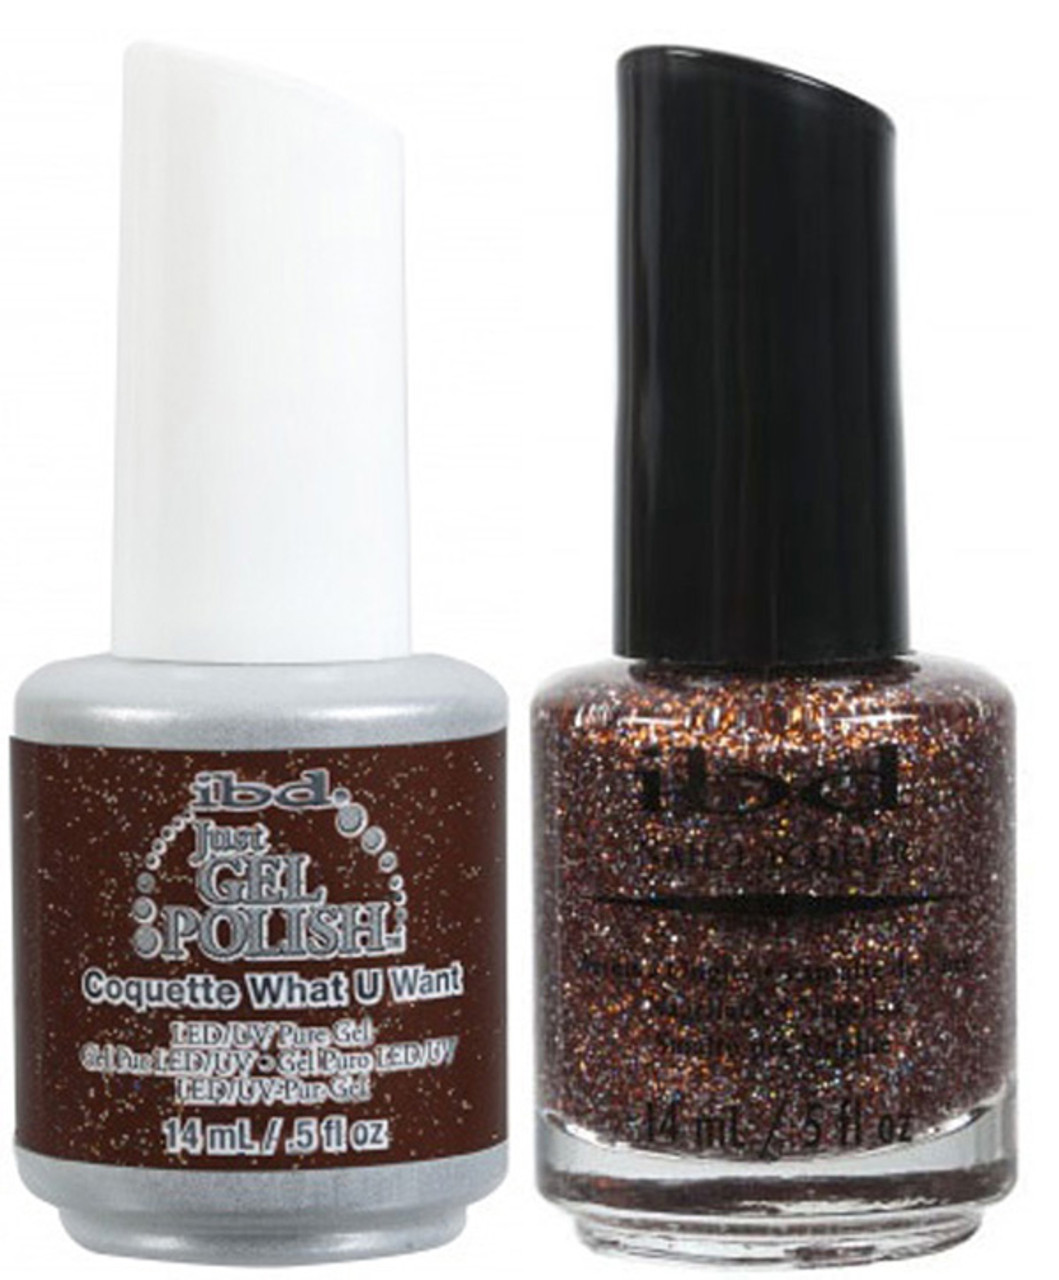 ibd Just Gel Polish & Nail Lacquer Coquette What You U Want - .5oz